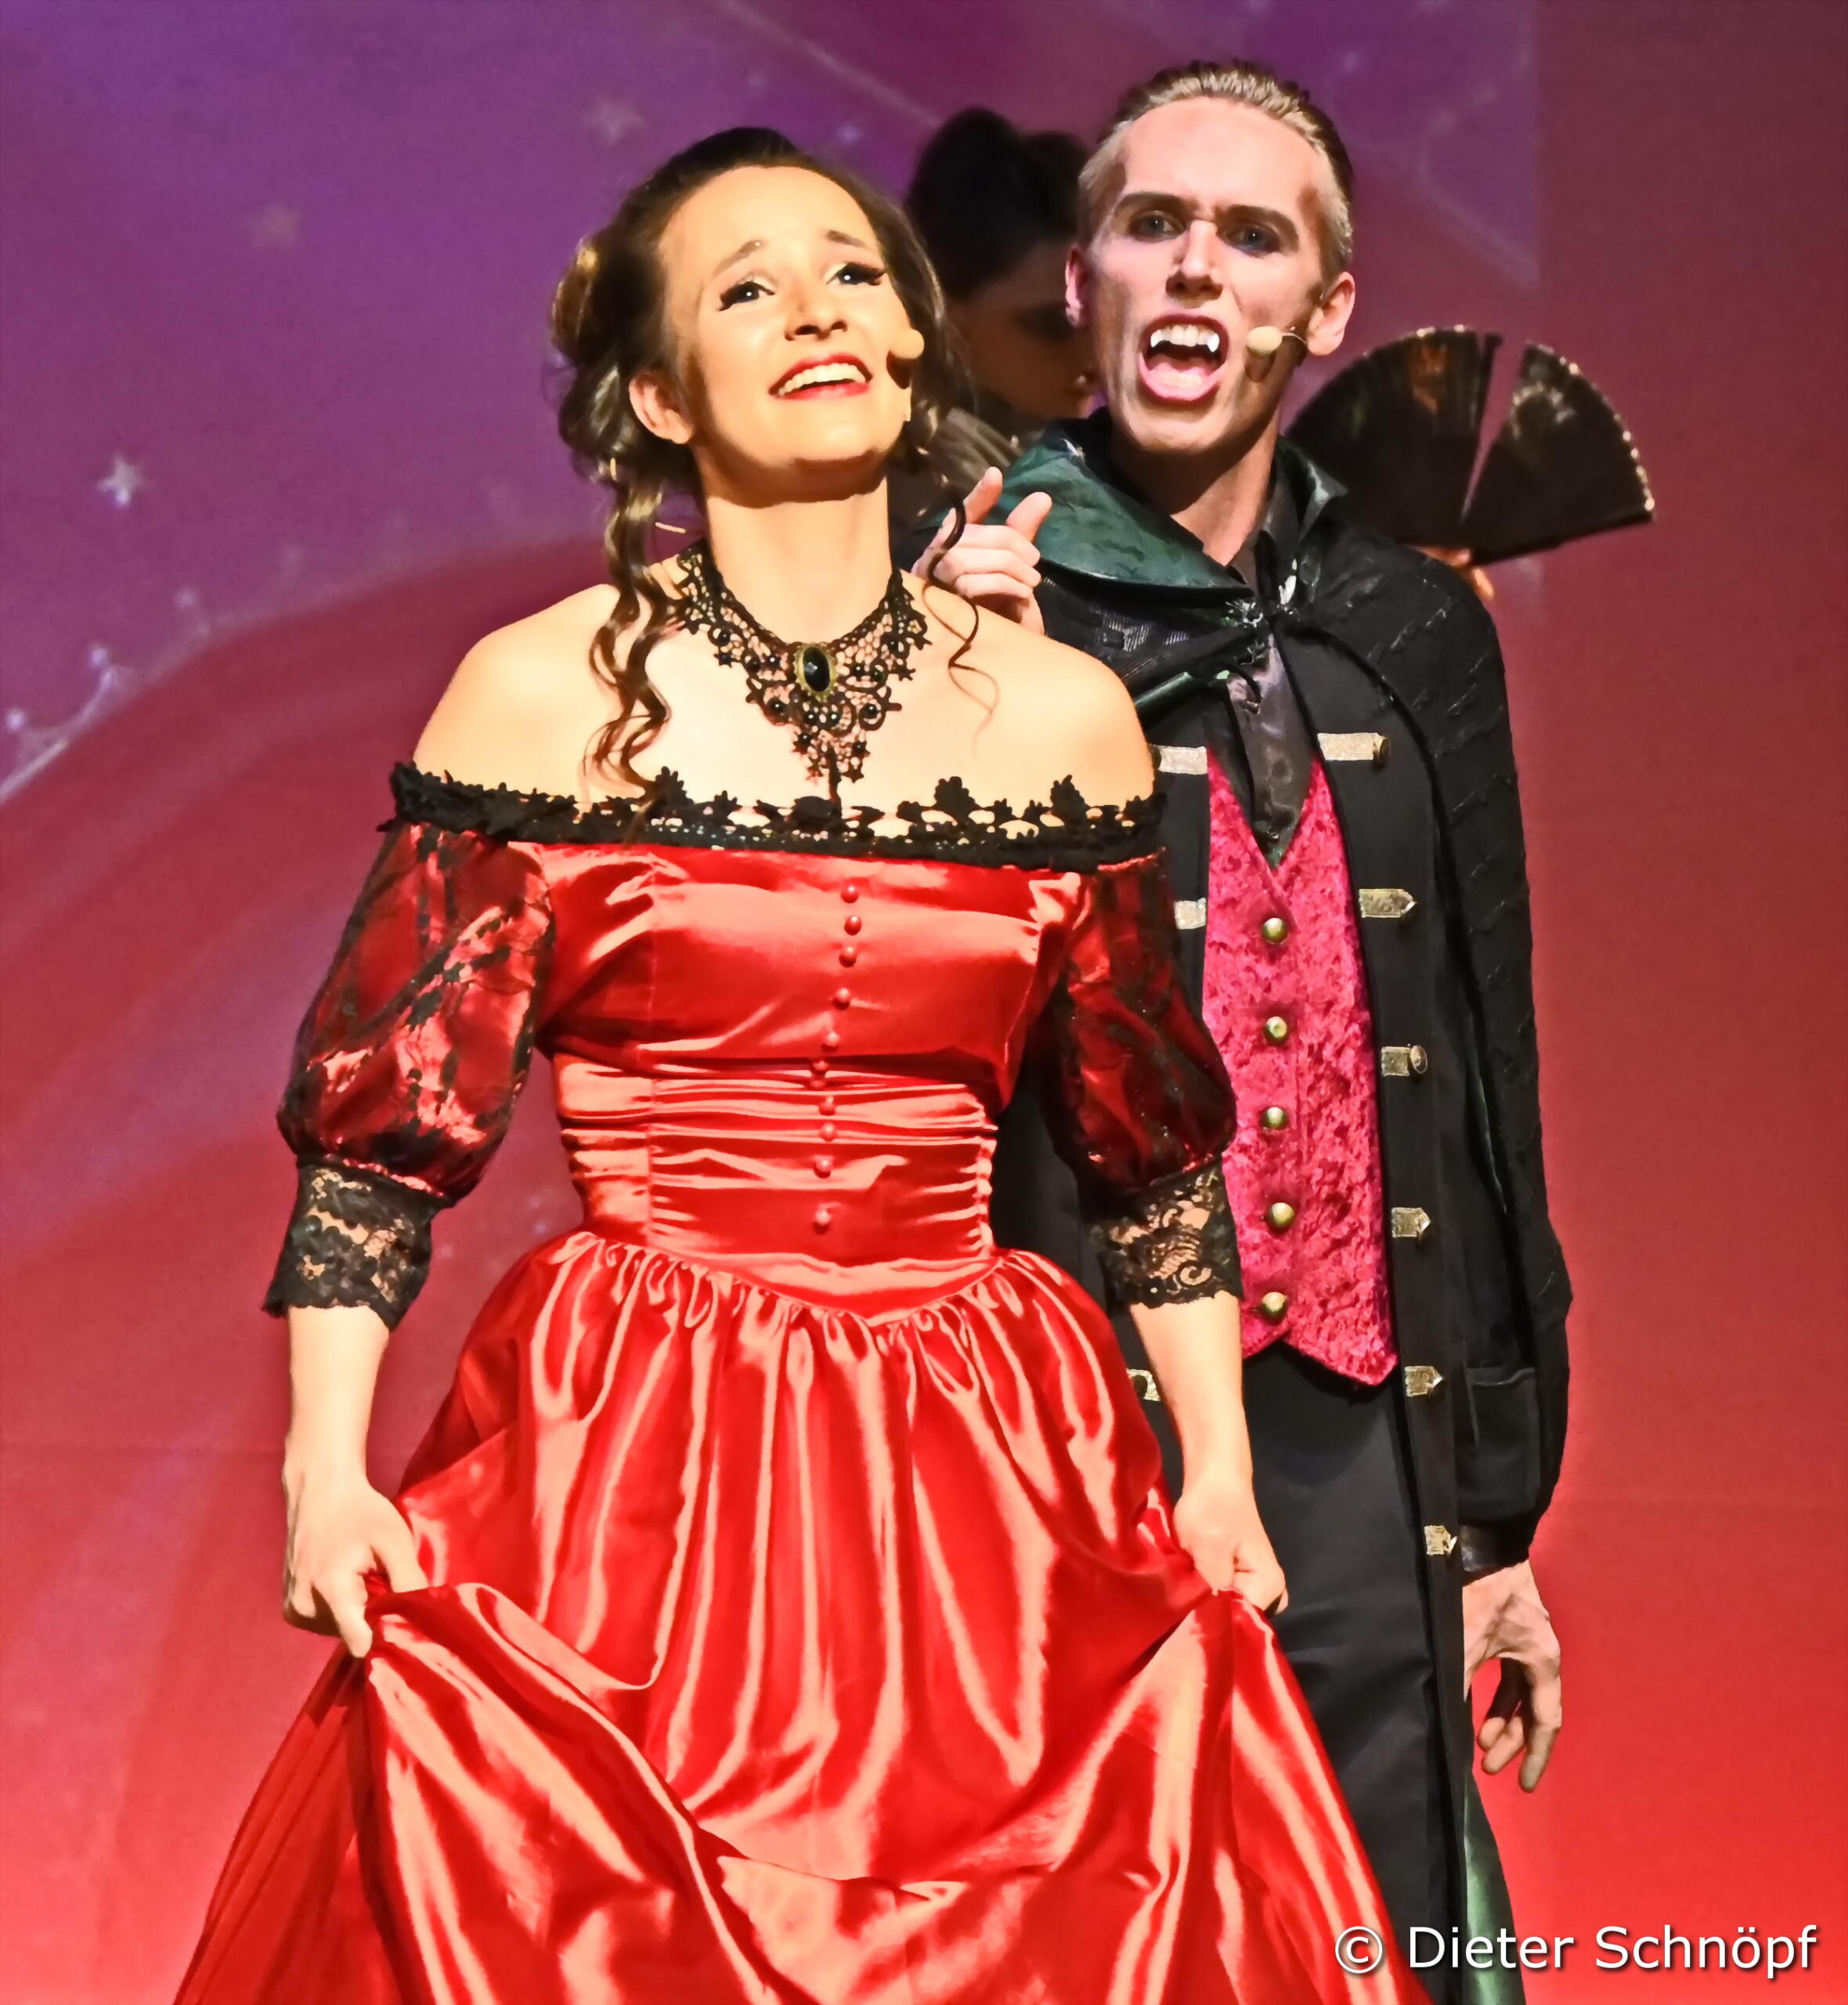 A woman and a man in vampire costumes.